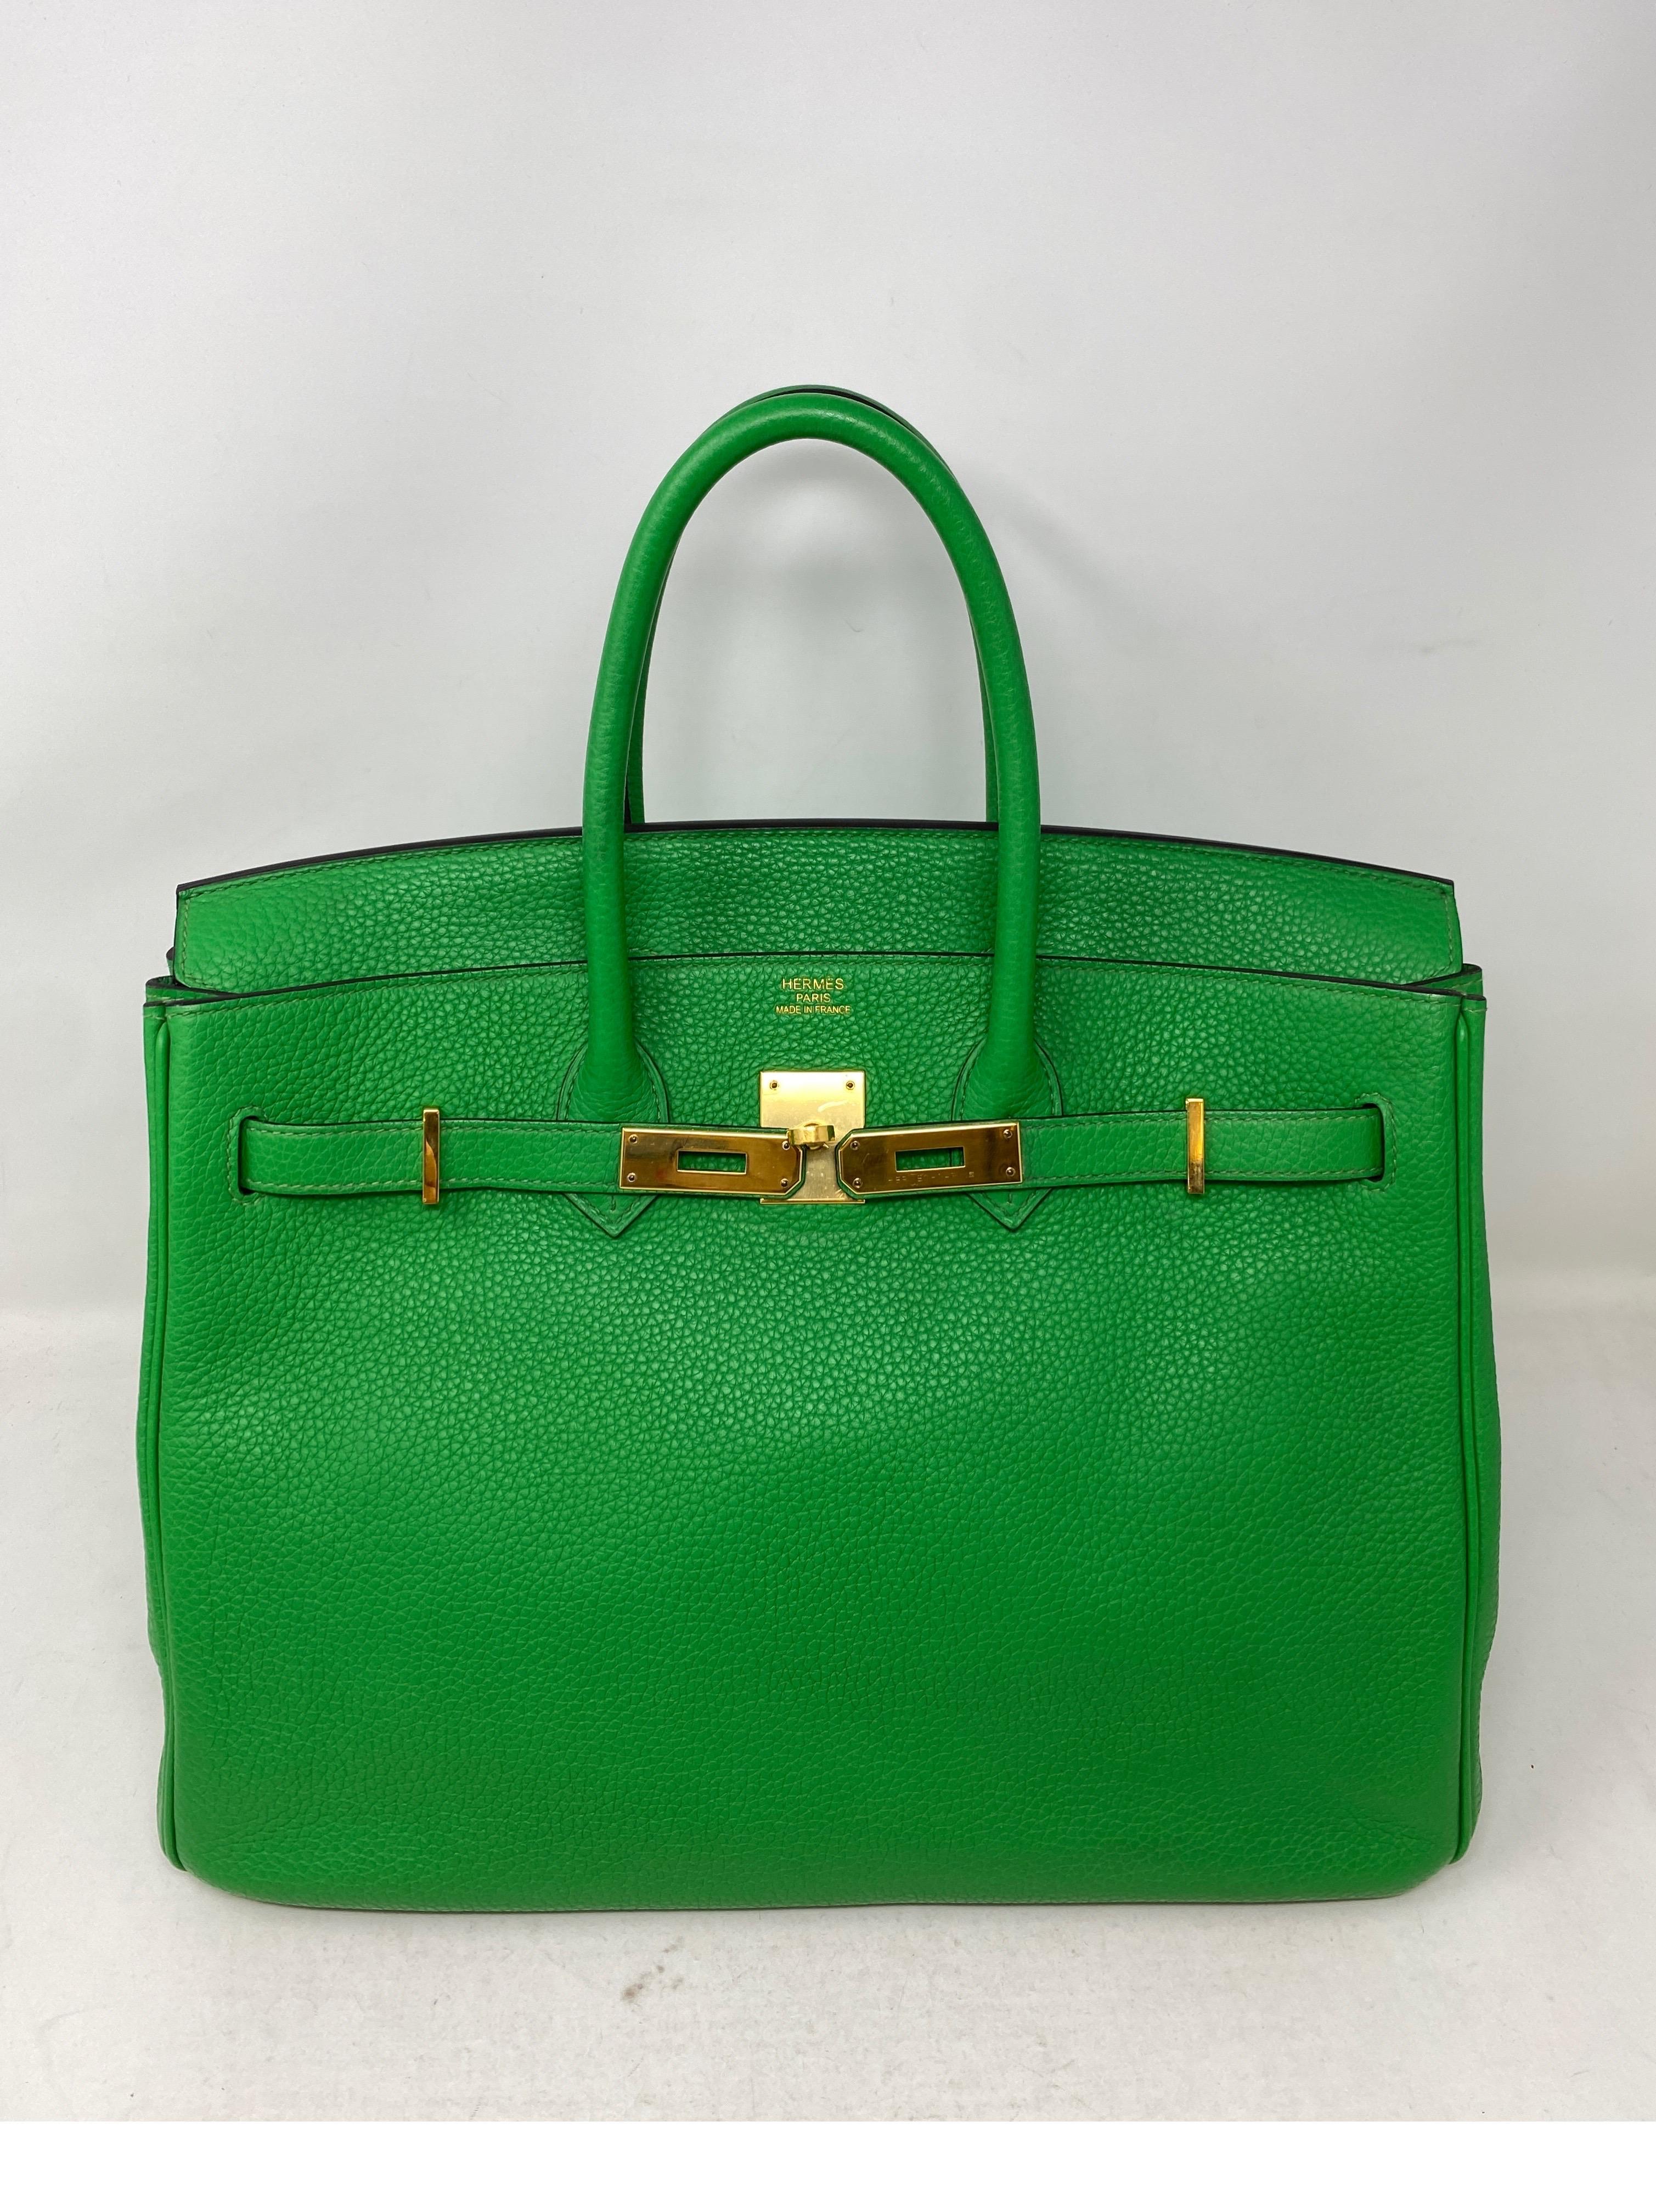 Hermes Bamboo Birkin 35 Bag. Beautiful rare bamboo green color with gold hardware. Excellent condition. Togo leather. R stamp. Includes clochette, lock, keys, and dust cover. Guaranteed authentic. 